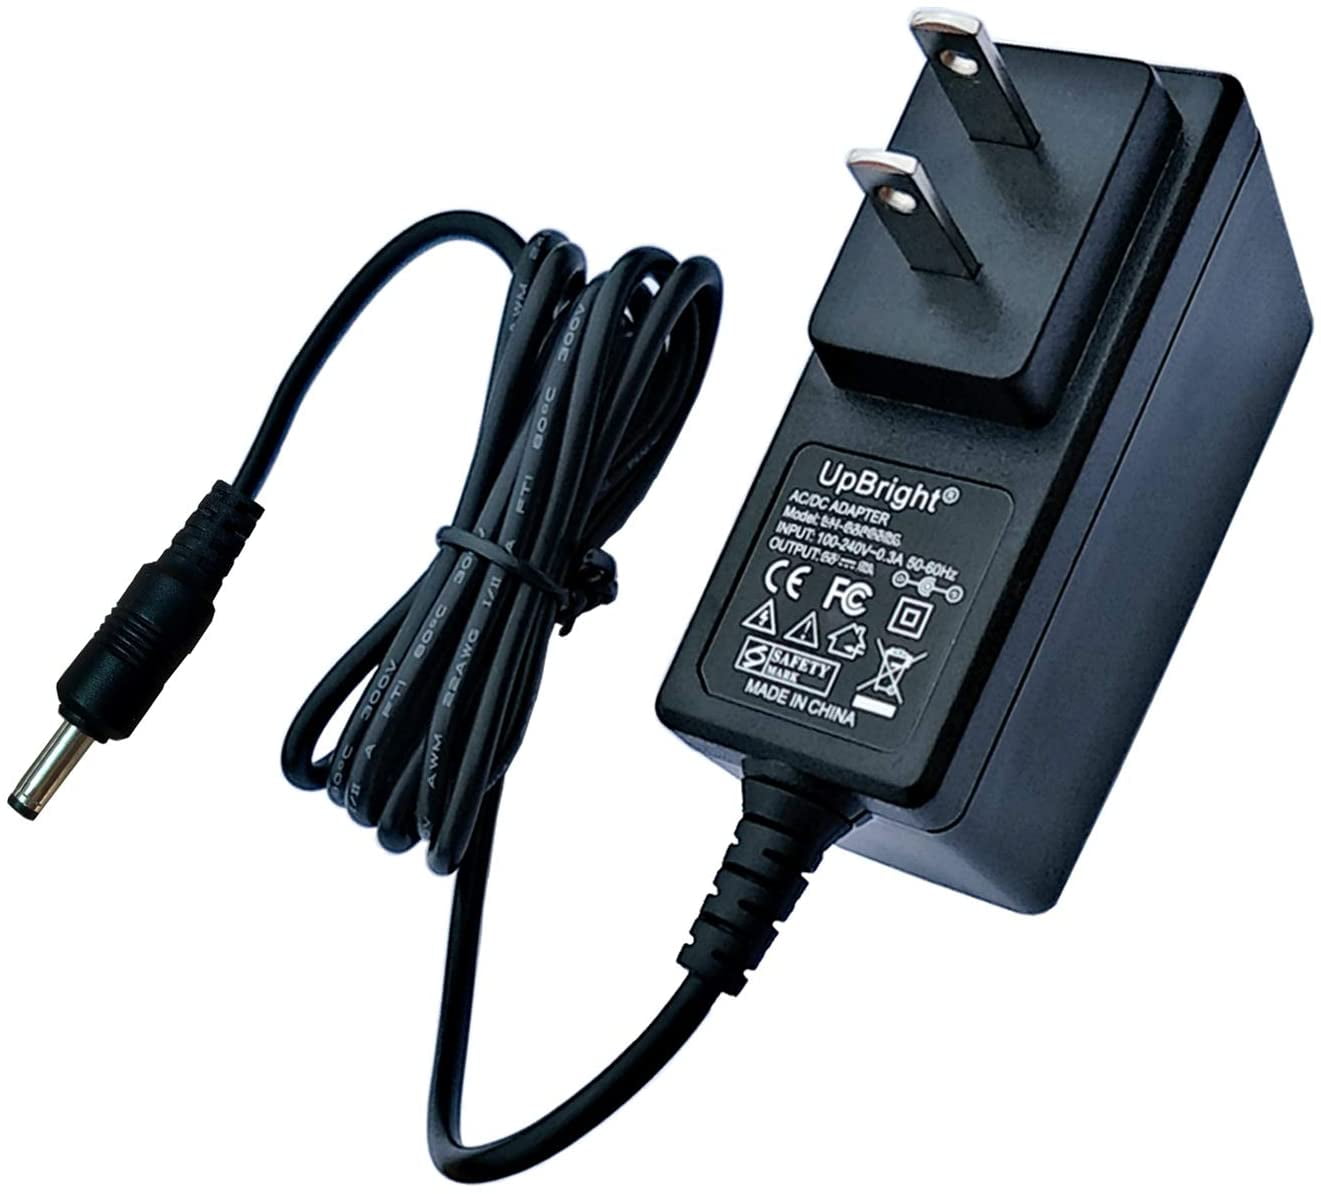 charger AC adapter for SPIDERMAN RAZOR Power Core E90 ELECTRIC SCOOTER 13111460 